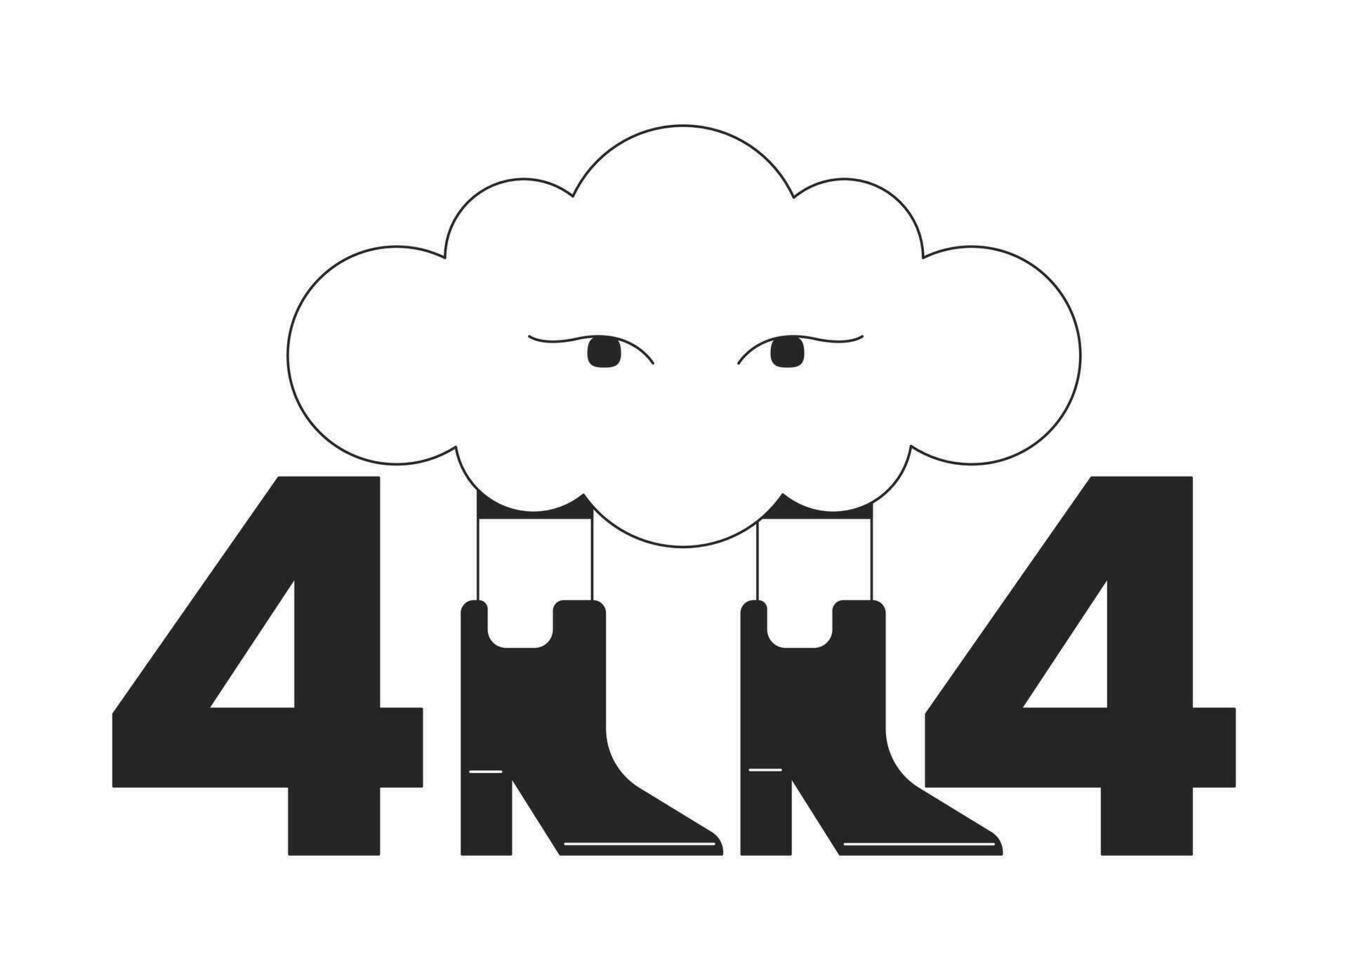 Stylish surreal cloud in boots black white error 404 flash message. Fantasy creature. Monochrome empty state ui design. Page not found popup cartoon image. Vector flat outline illustration concept